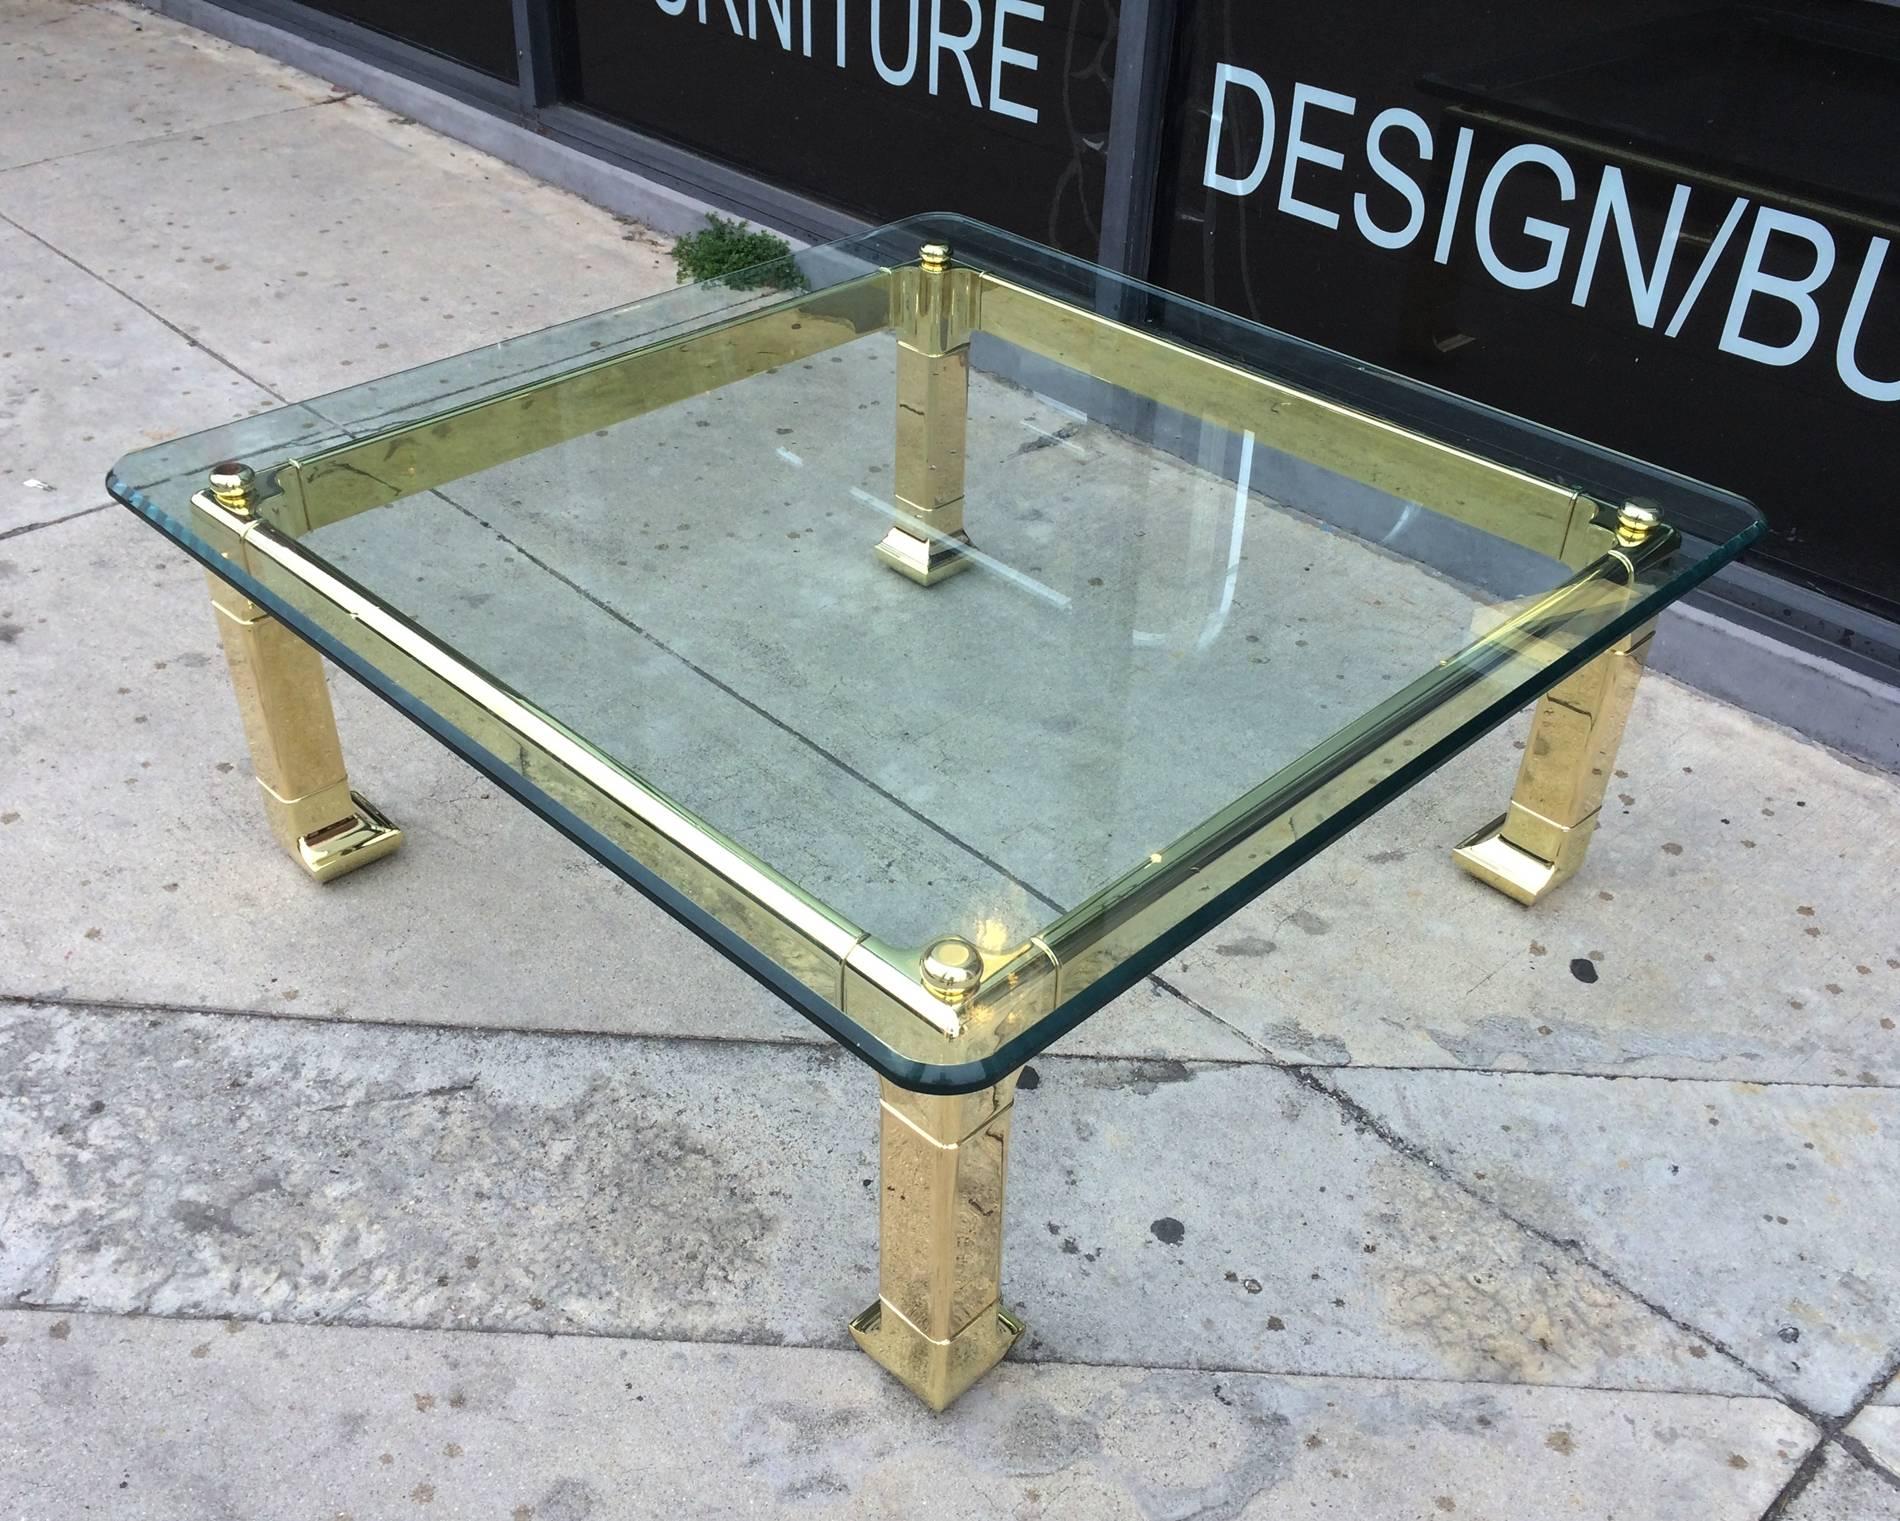 Stunning and rare solid brass coffee table designed and manufactured in the 1970s by Mastercraft.
The table is newly polished and is in excellent condition, the glass is original and it has a nice bevel edge however a few surface scratches are